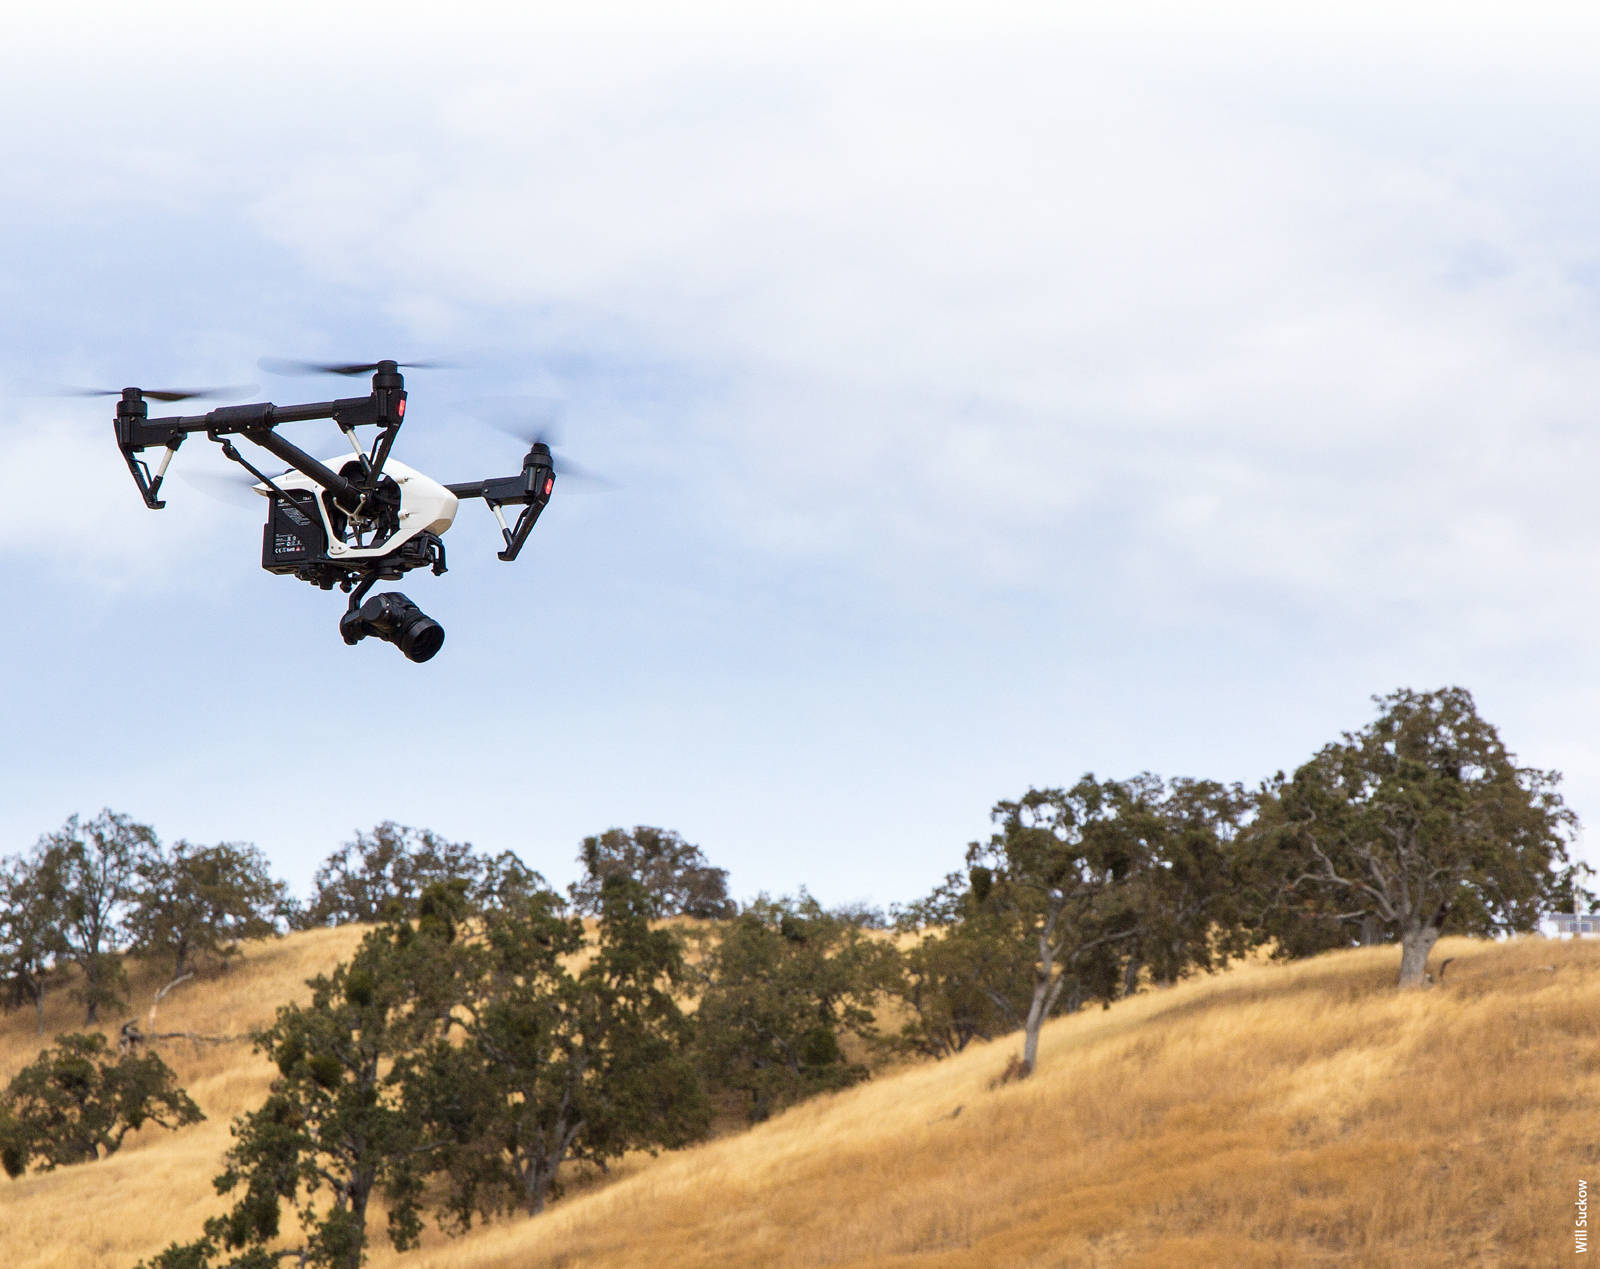 The Inspire 1 drone, made by DJI, flies with an RGB camera over the UC Berkeley Blue Oak Ranch Reserve in Santa Clara County.